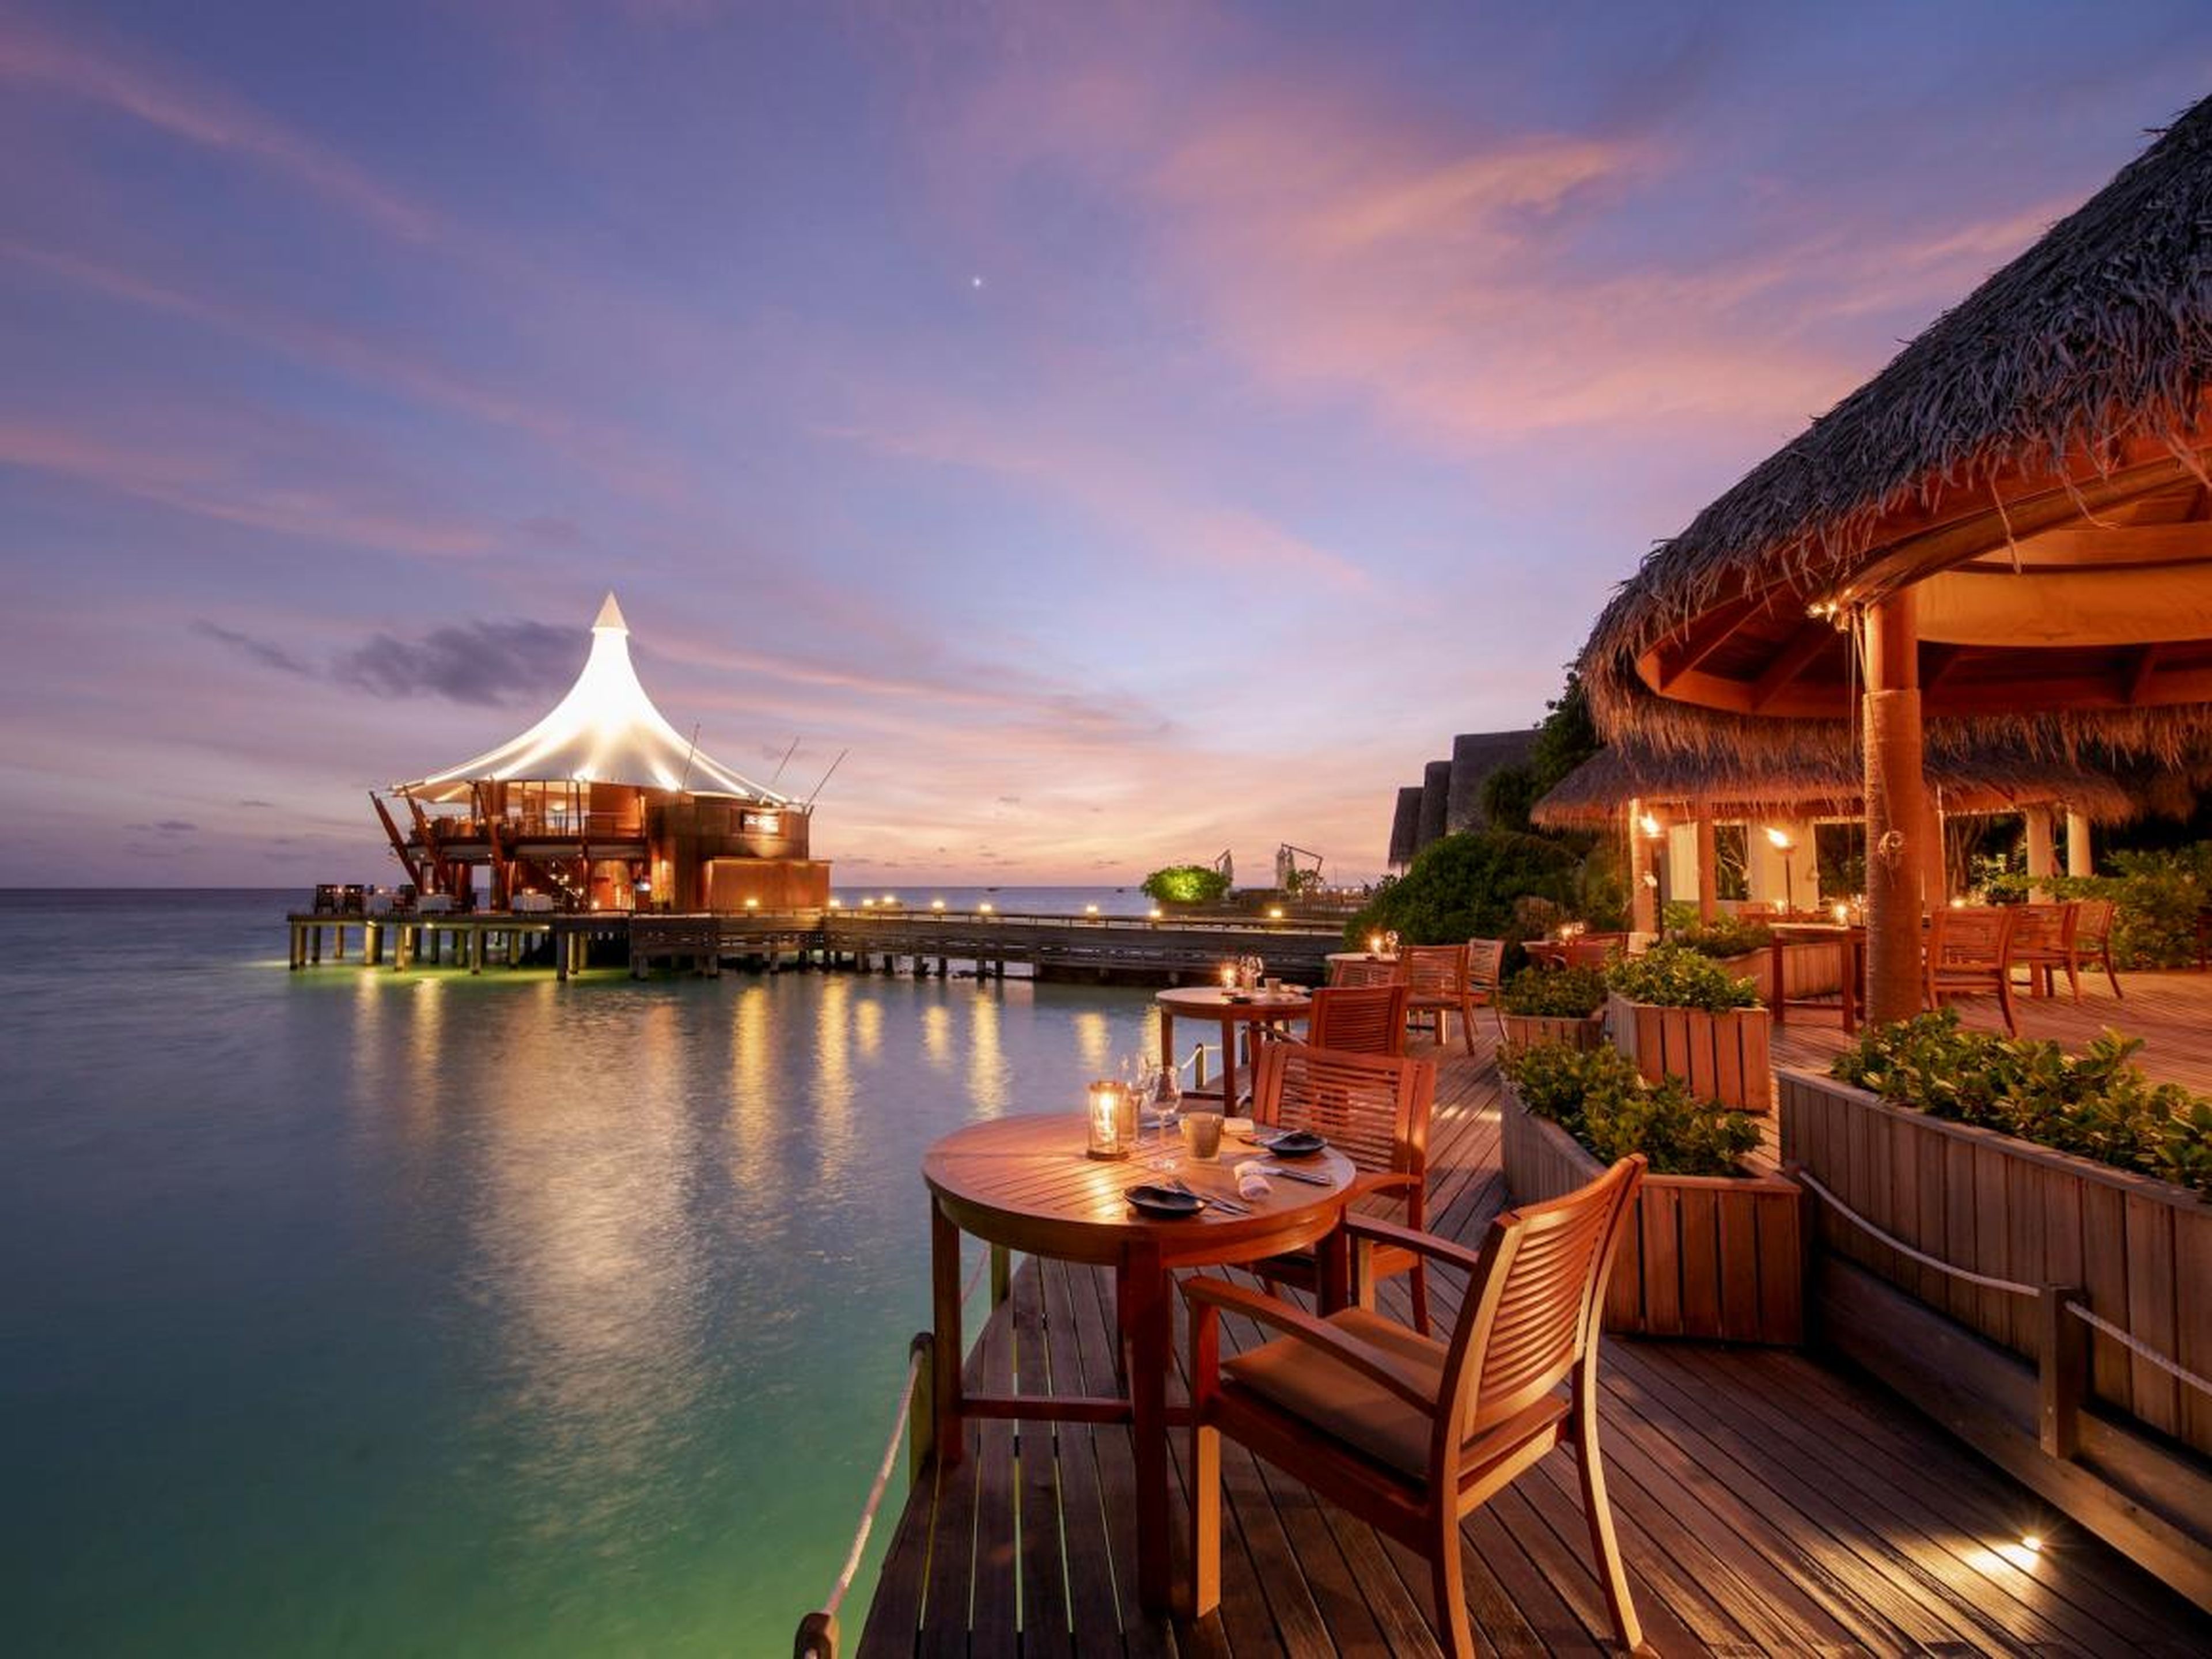 Baros opened more than 44 years ago, making it one of the first resorts to open in the Maldives.